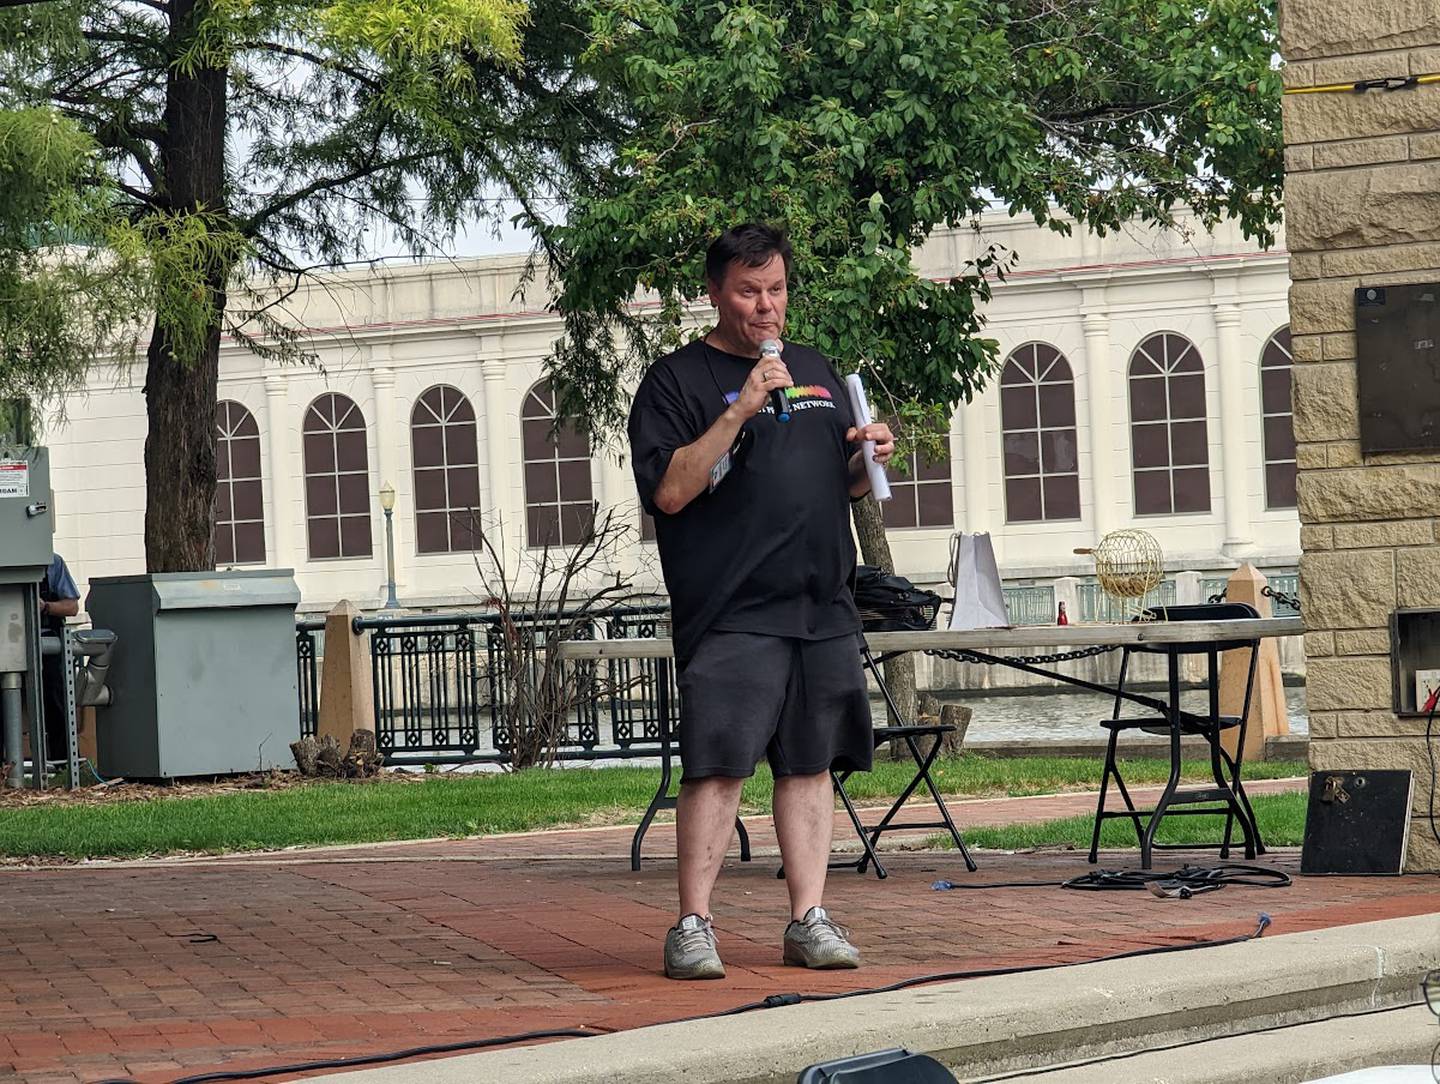 Jeff Gregory, president of the Joliet Pride Network, speaks at the third Joliet PrideFest.  The Joliet Pride Network held the event on Saturday, Sept. 17, 2022, at the Billie Limacher Bicentennial Park and Theatre in Joliet. The family friendly event included an all-age drag show, live music, food, and activities for children and teens.